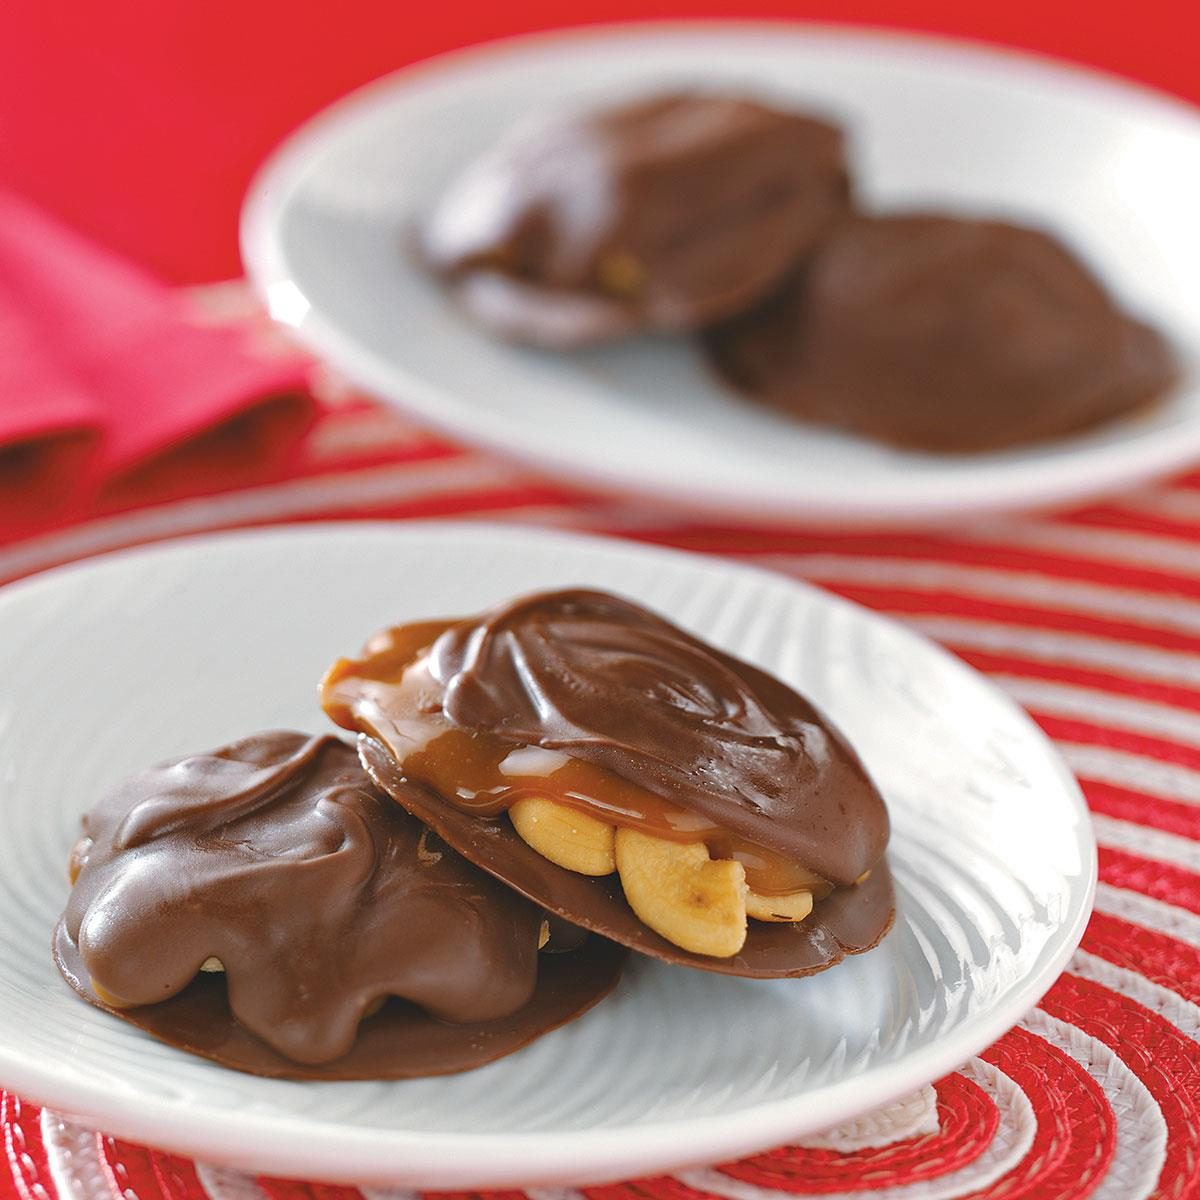 Caramel Cashew Clusters Recipe: How to Make It